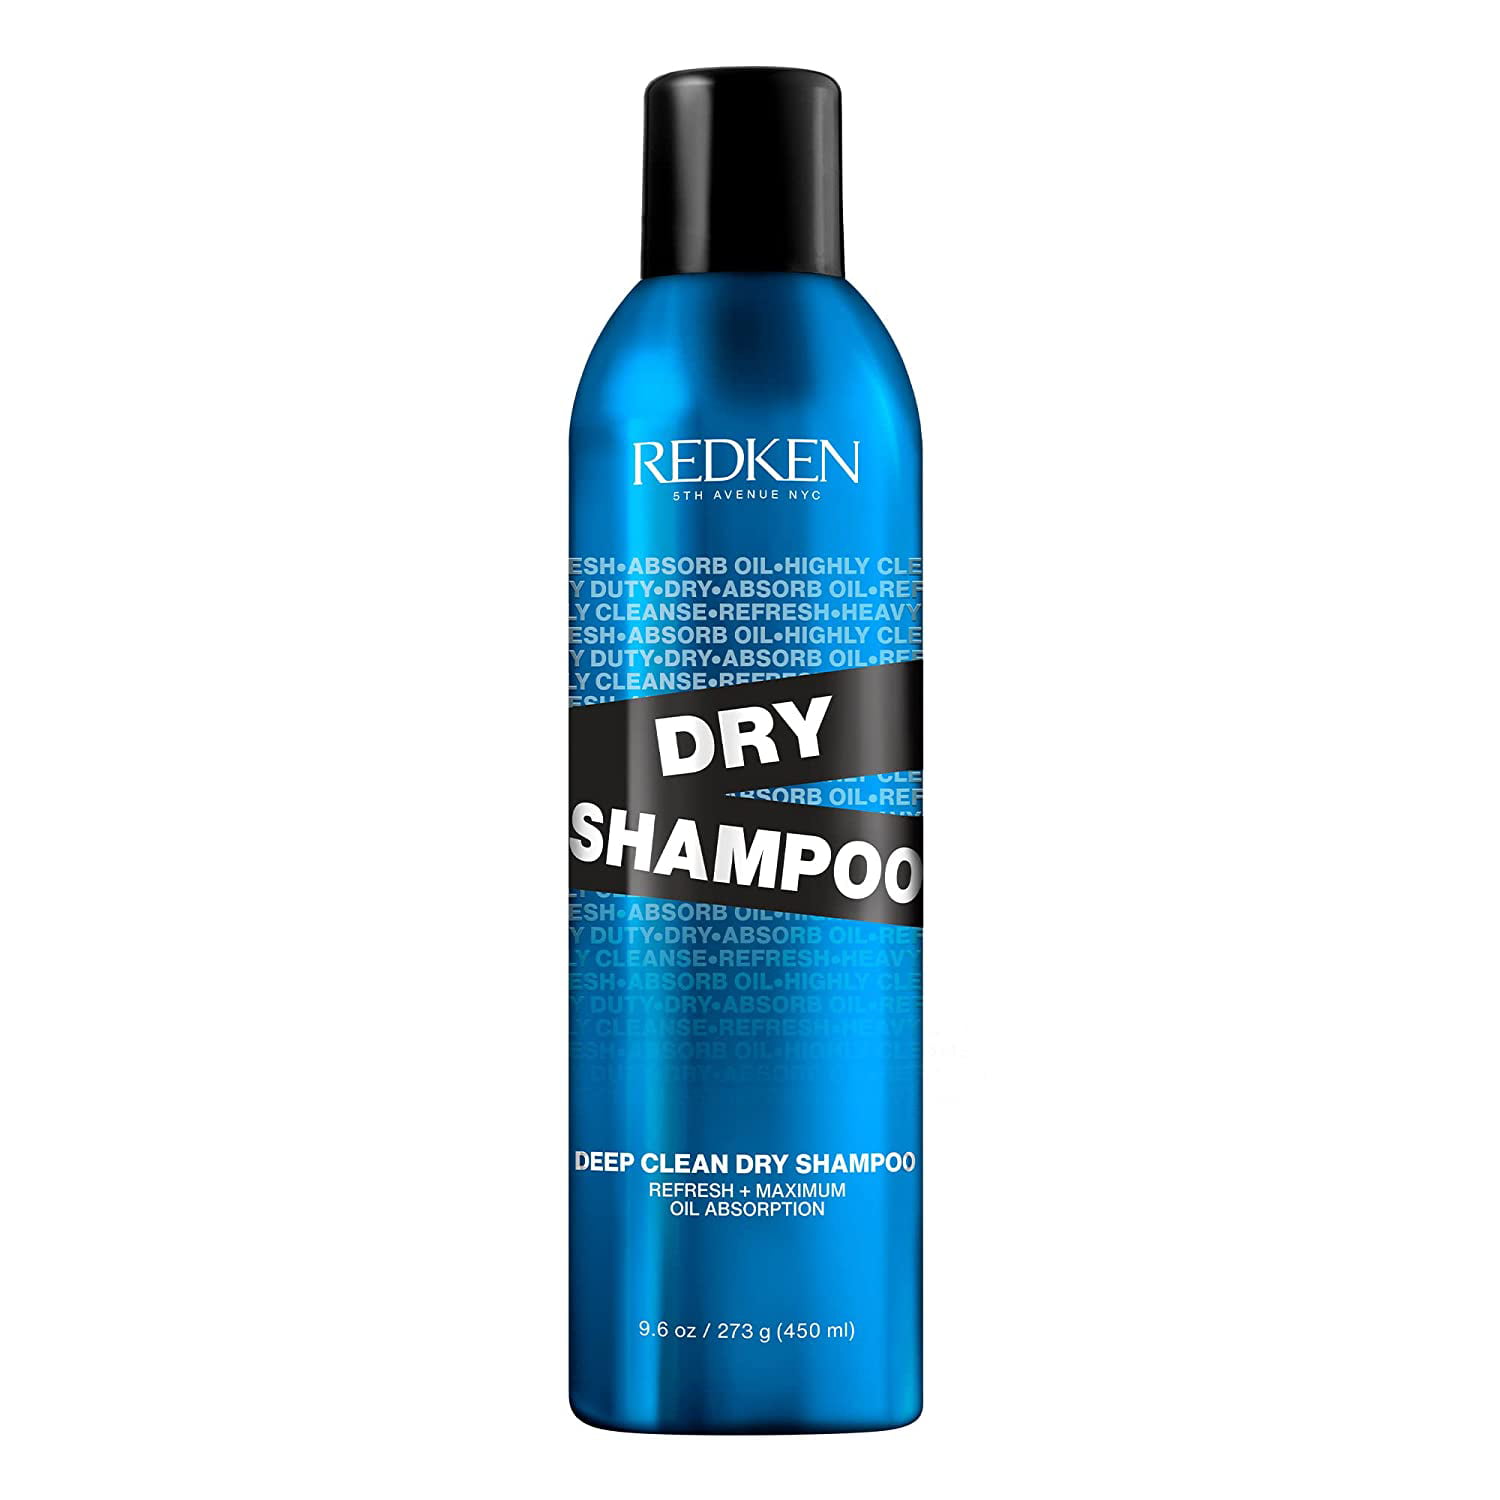 Redken Deep Clean Dry Shampoo | For All Hair Types | Instantly Refreshes  Hair & Absorbs Oil In Between Washes  Ounce (Pack of 1) 